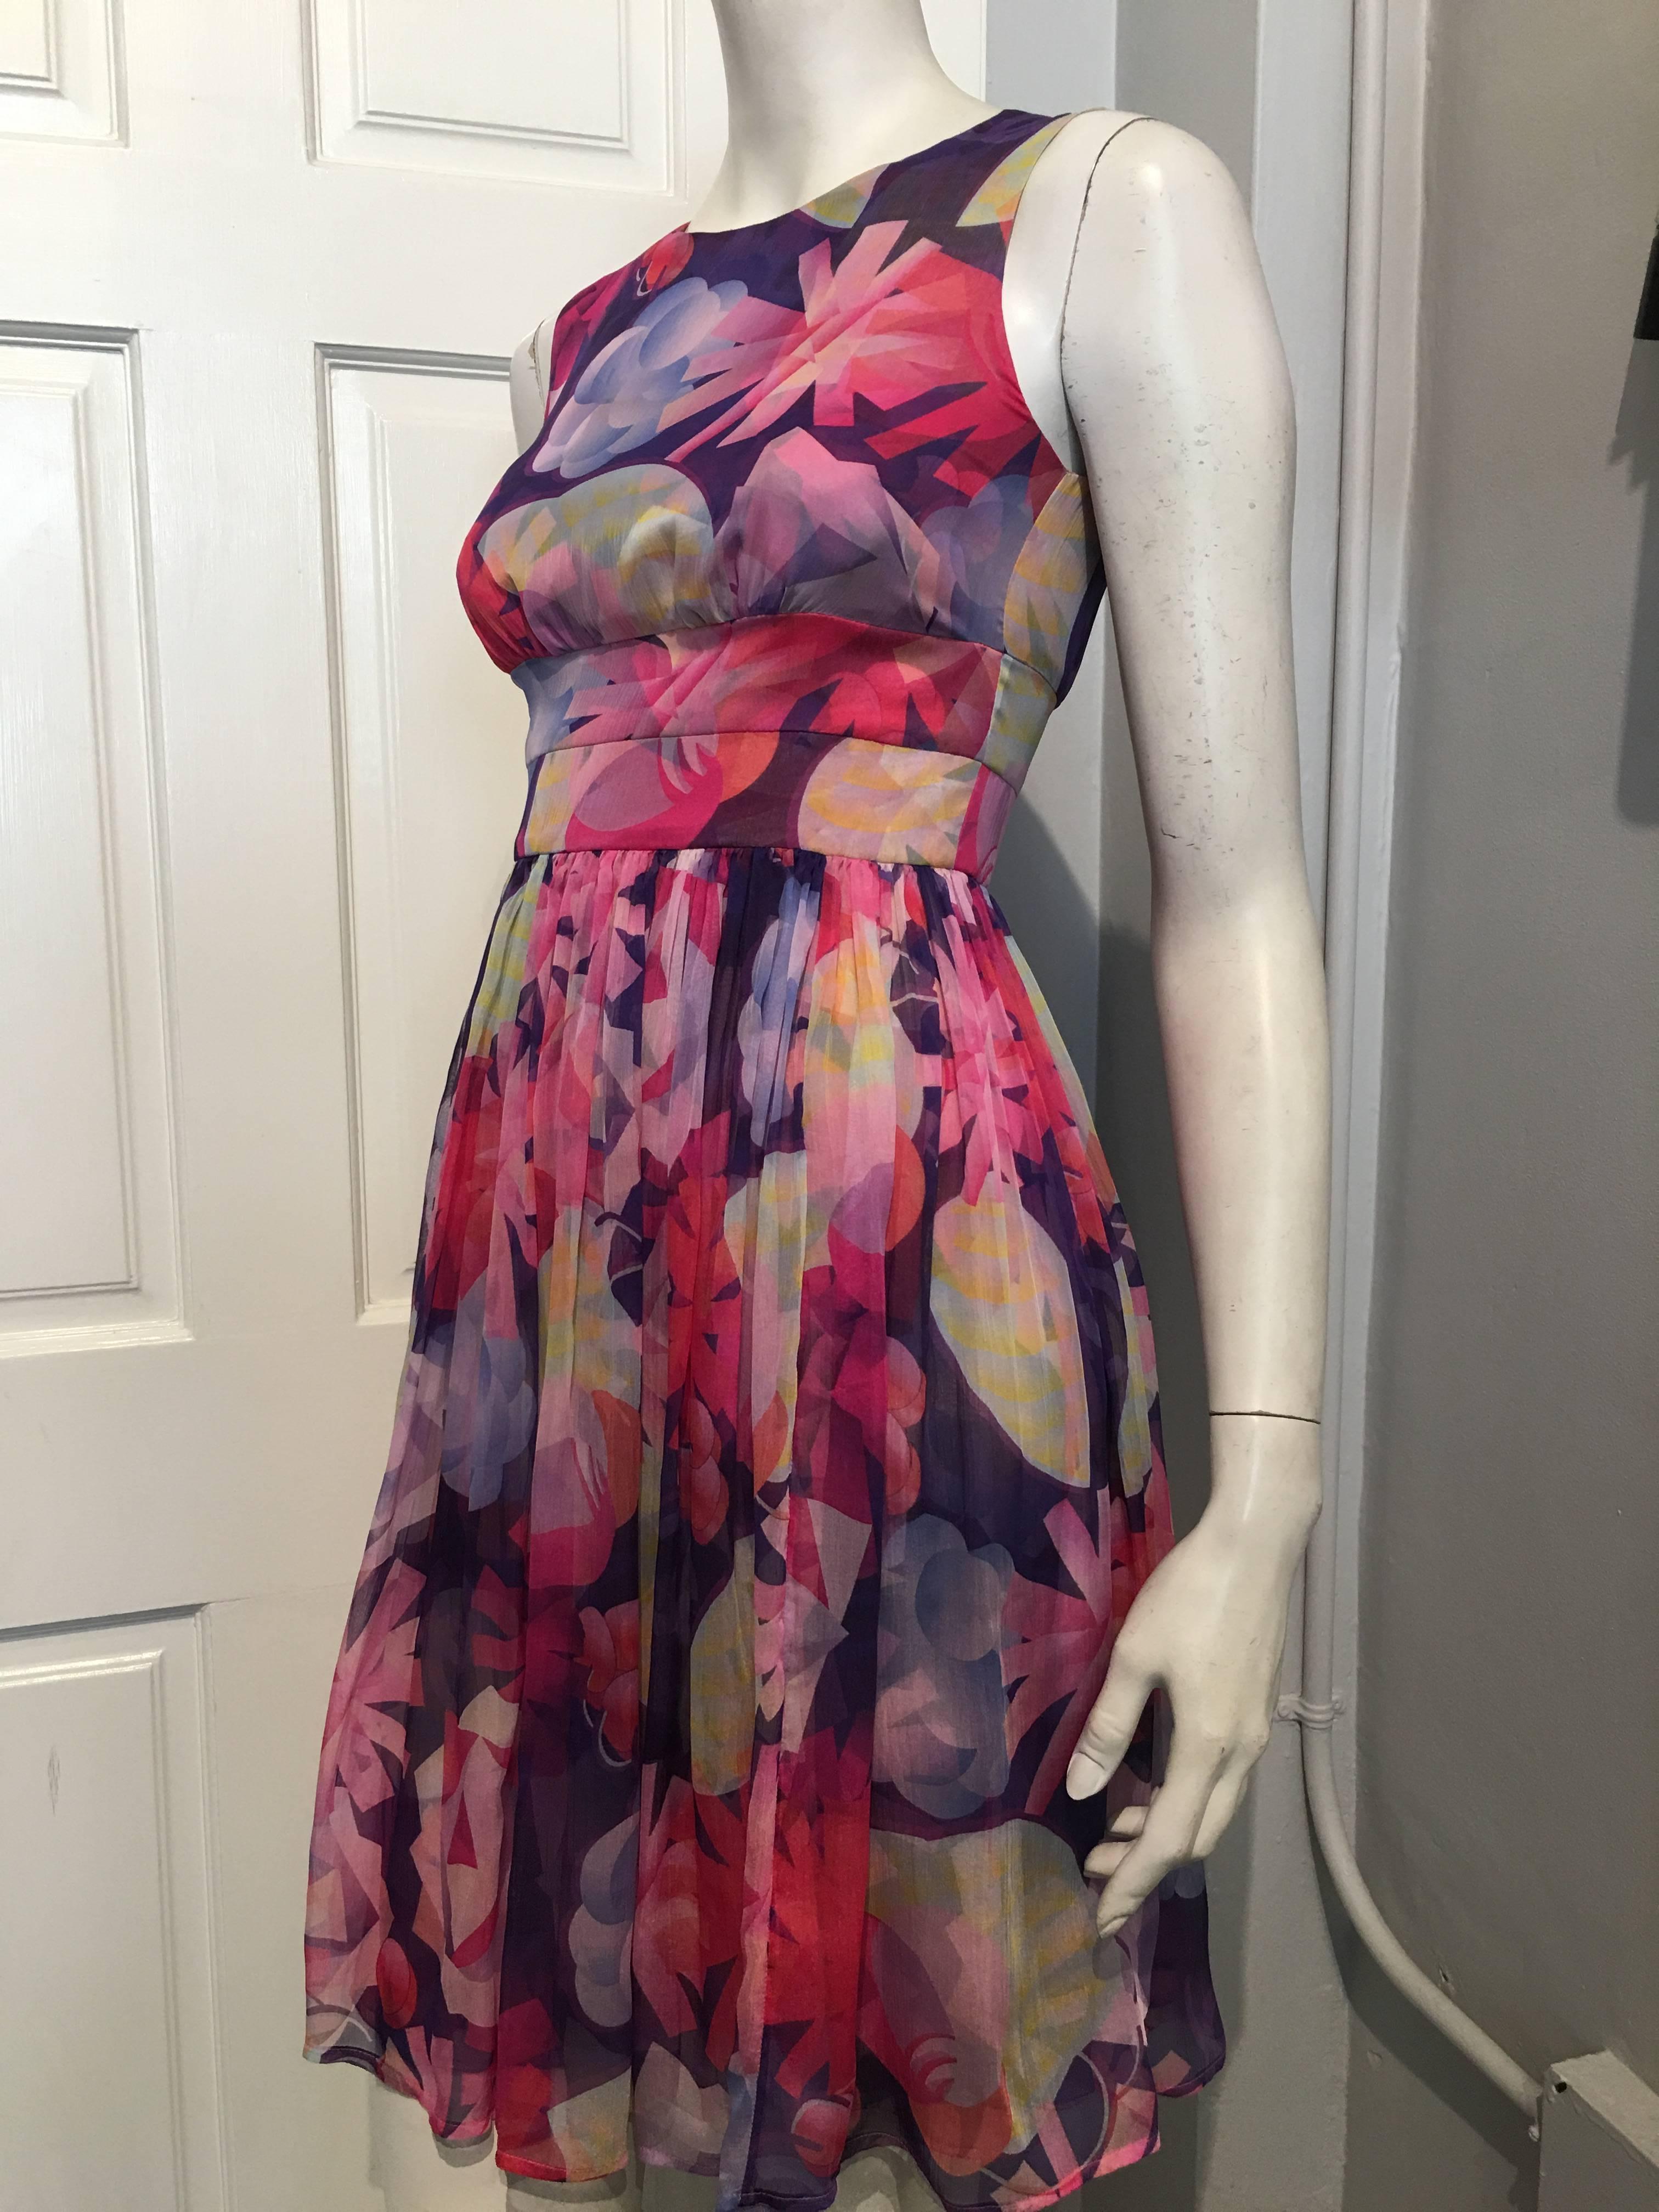 Chanel dress with a double layered full skirt and two tiered waist band with slight gathering under the bust, in a geometric floral type pattern in pink, purple and blue. 